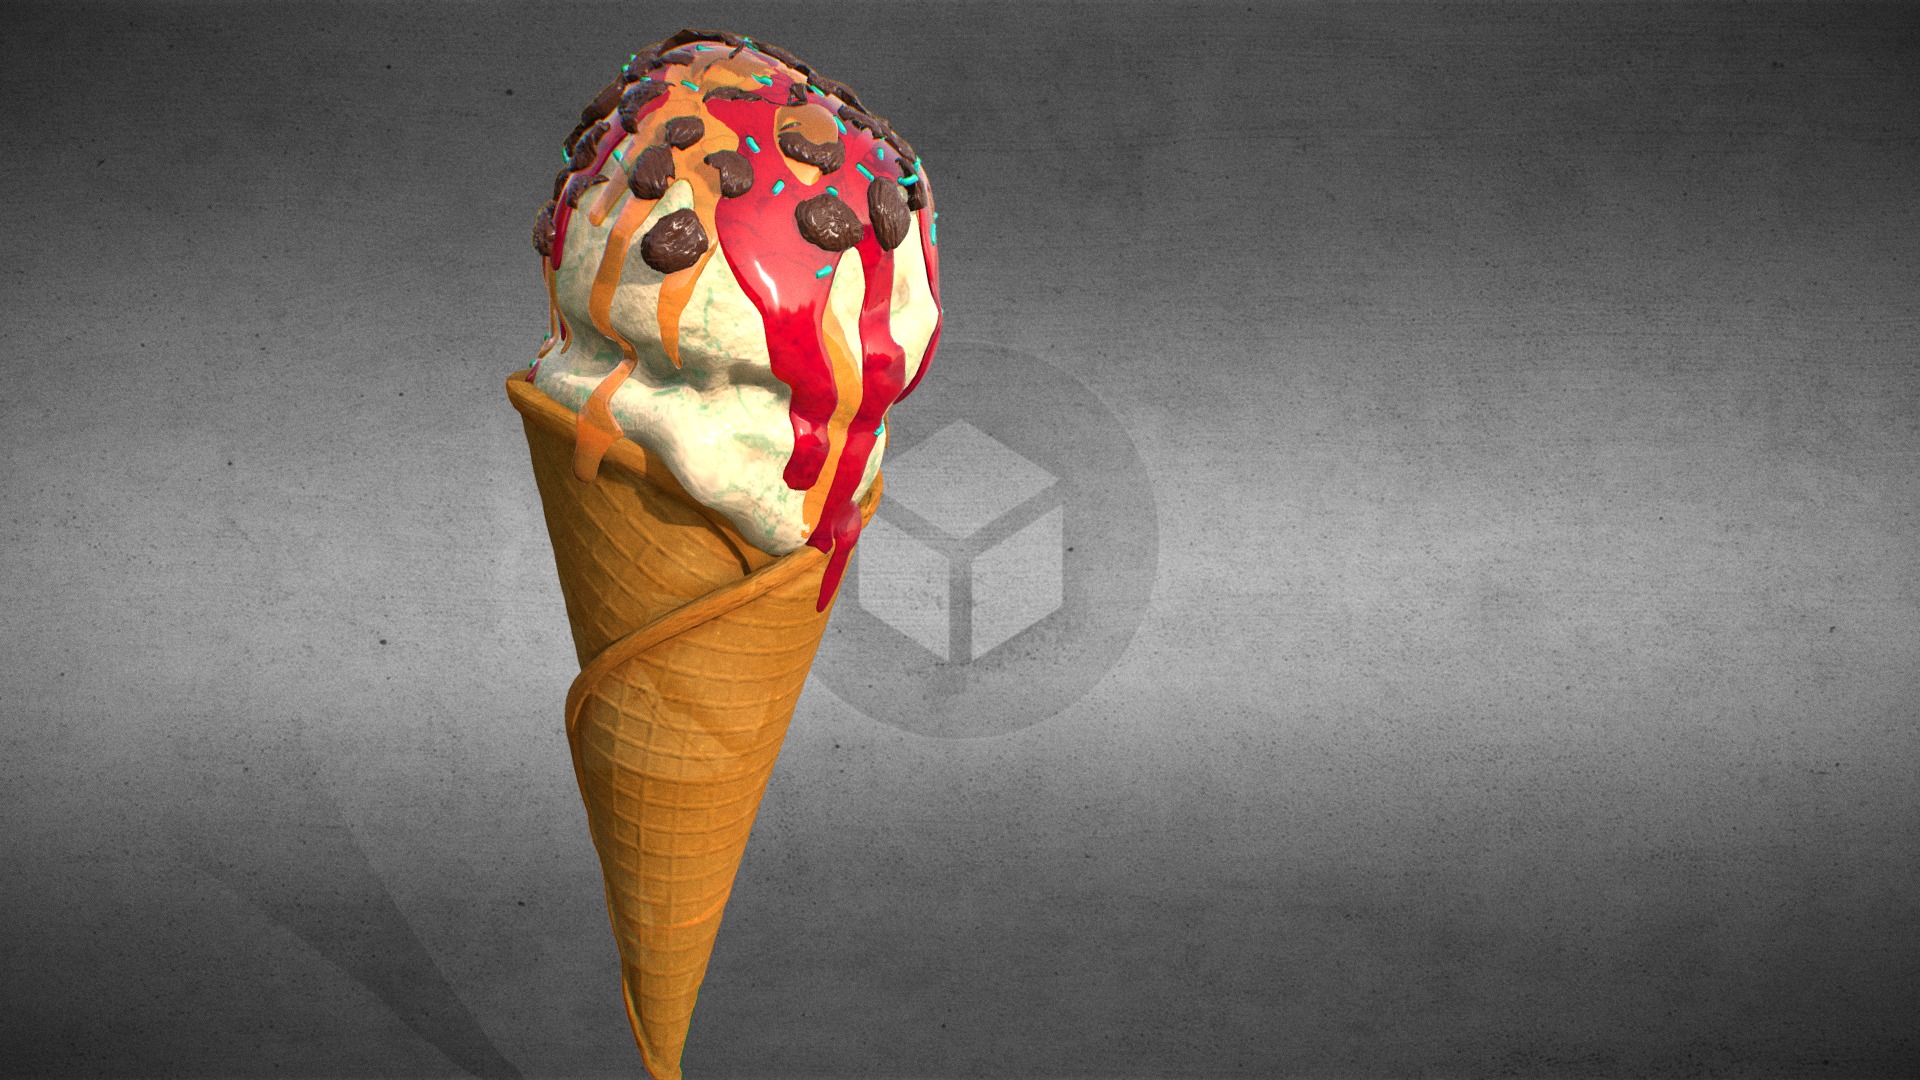 3D model ice cream in a waffle cone - This is a 3D model of the ice cream in a waffle cone. The 3D model is about a person wearing a mask.